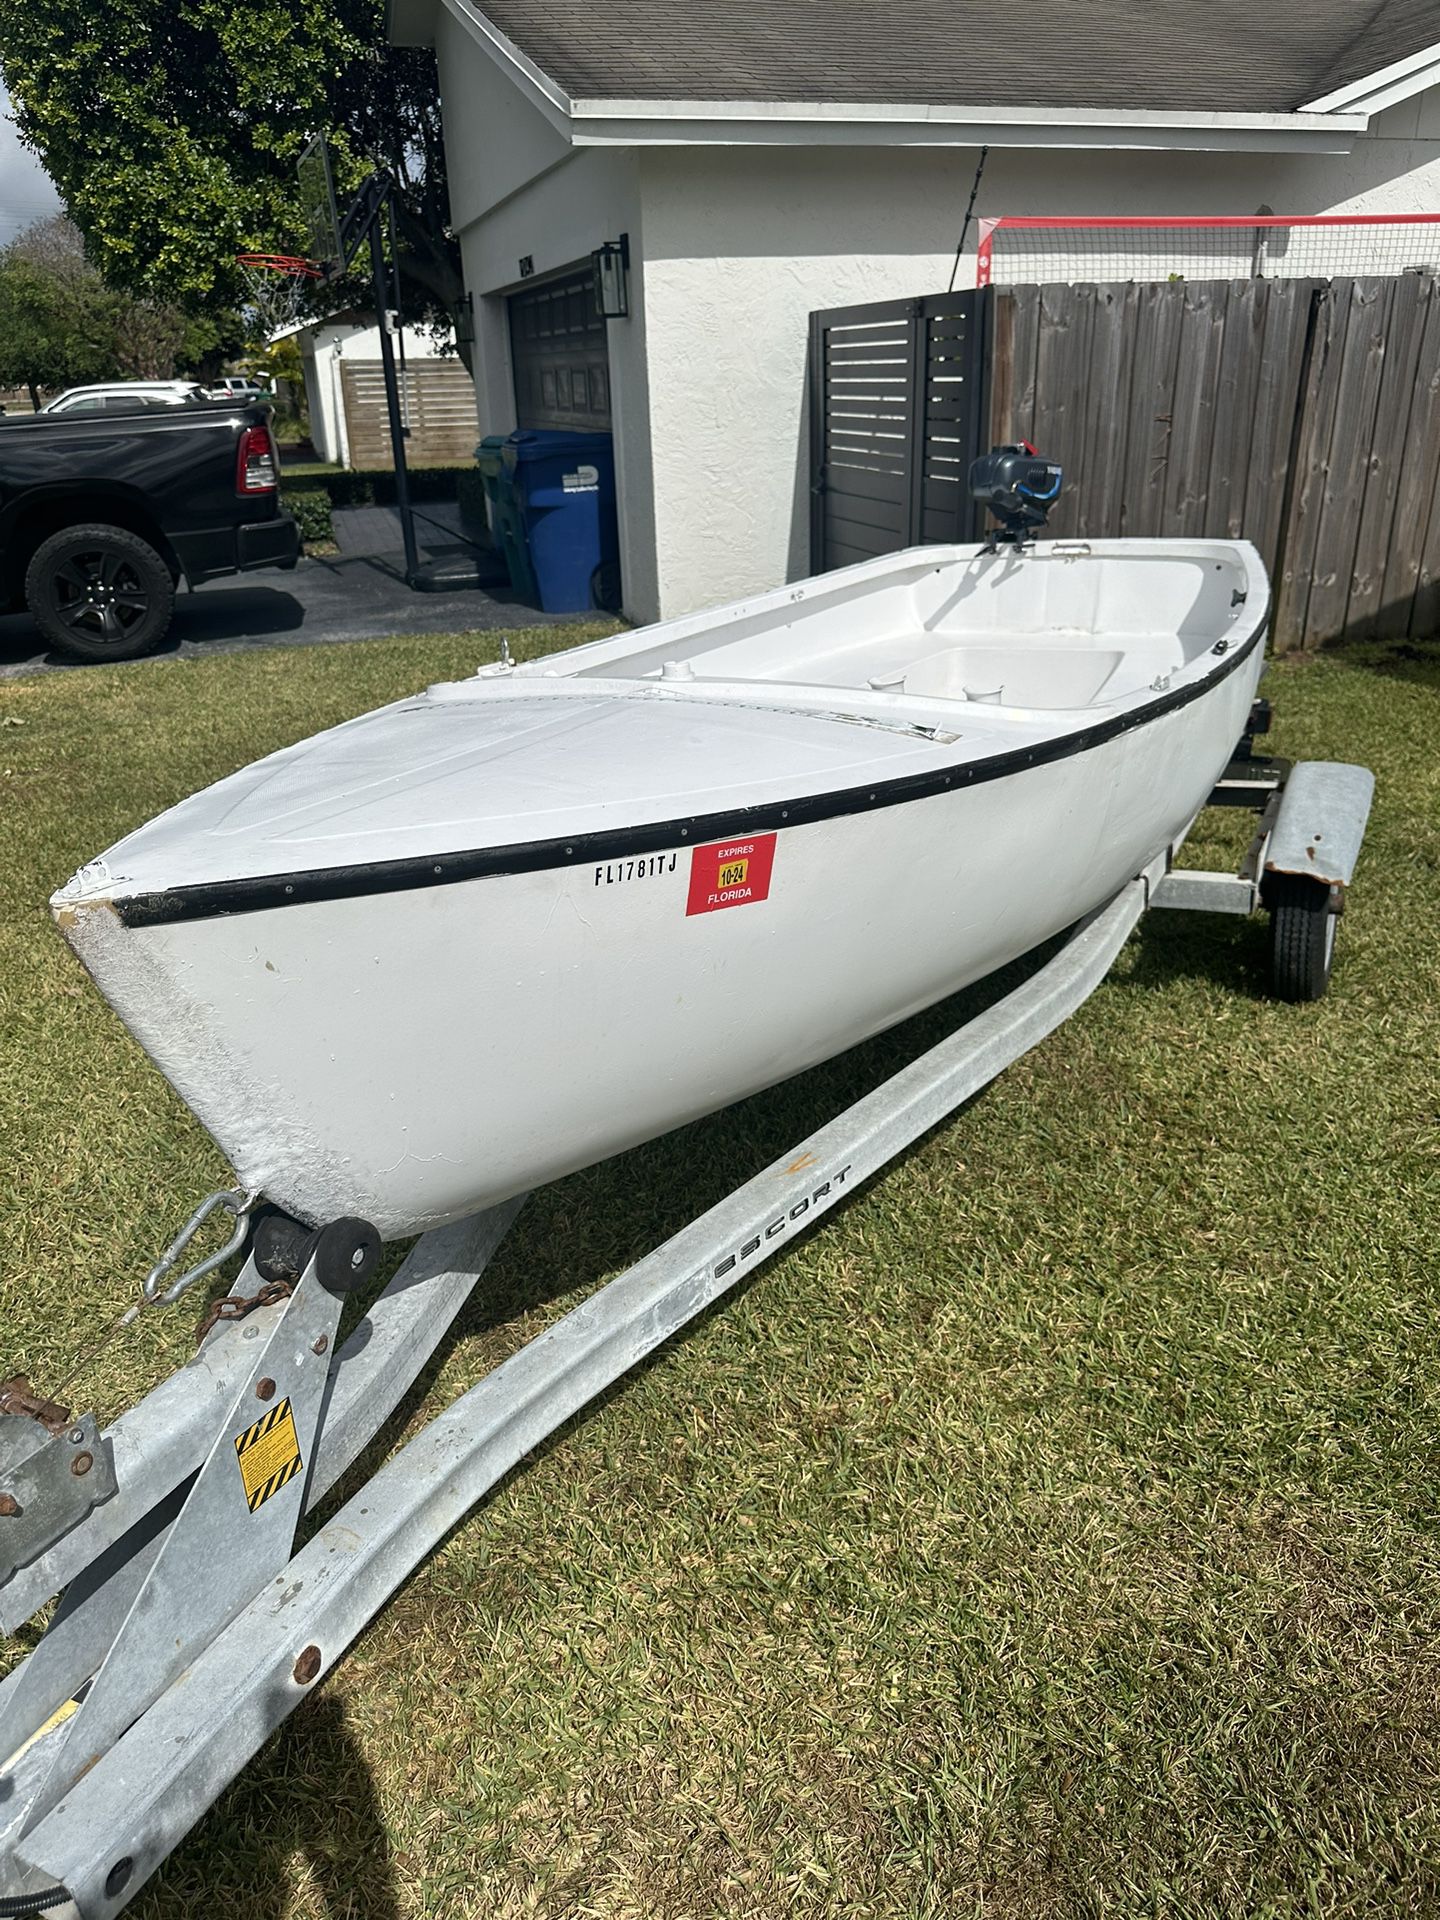 Sailboat 16’ With Trailer. Titles Included.